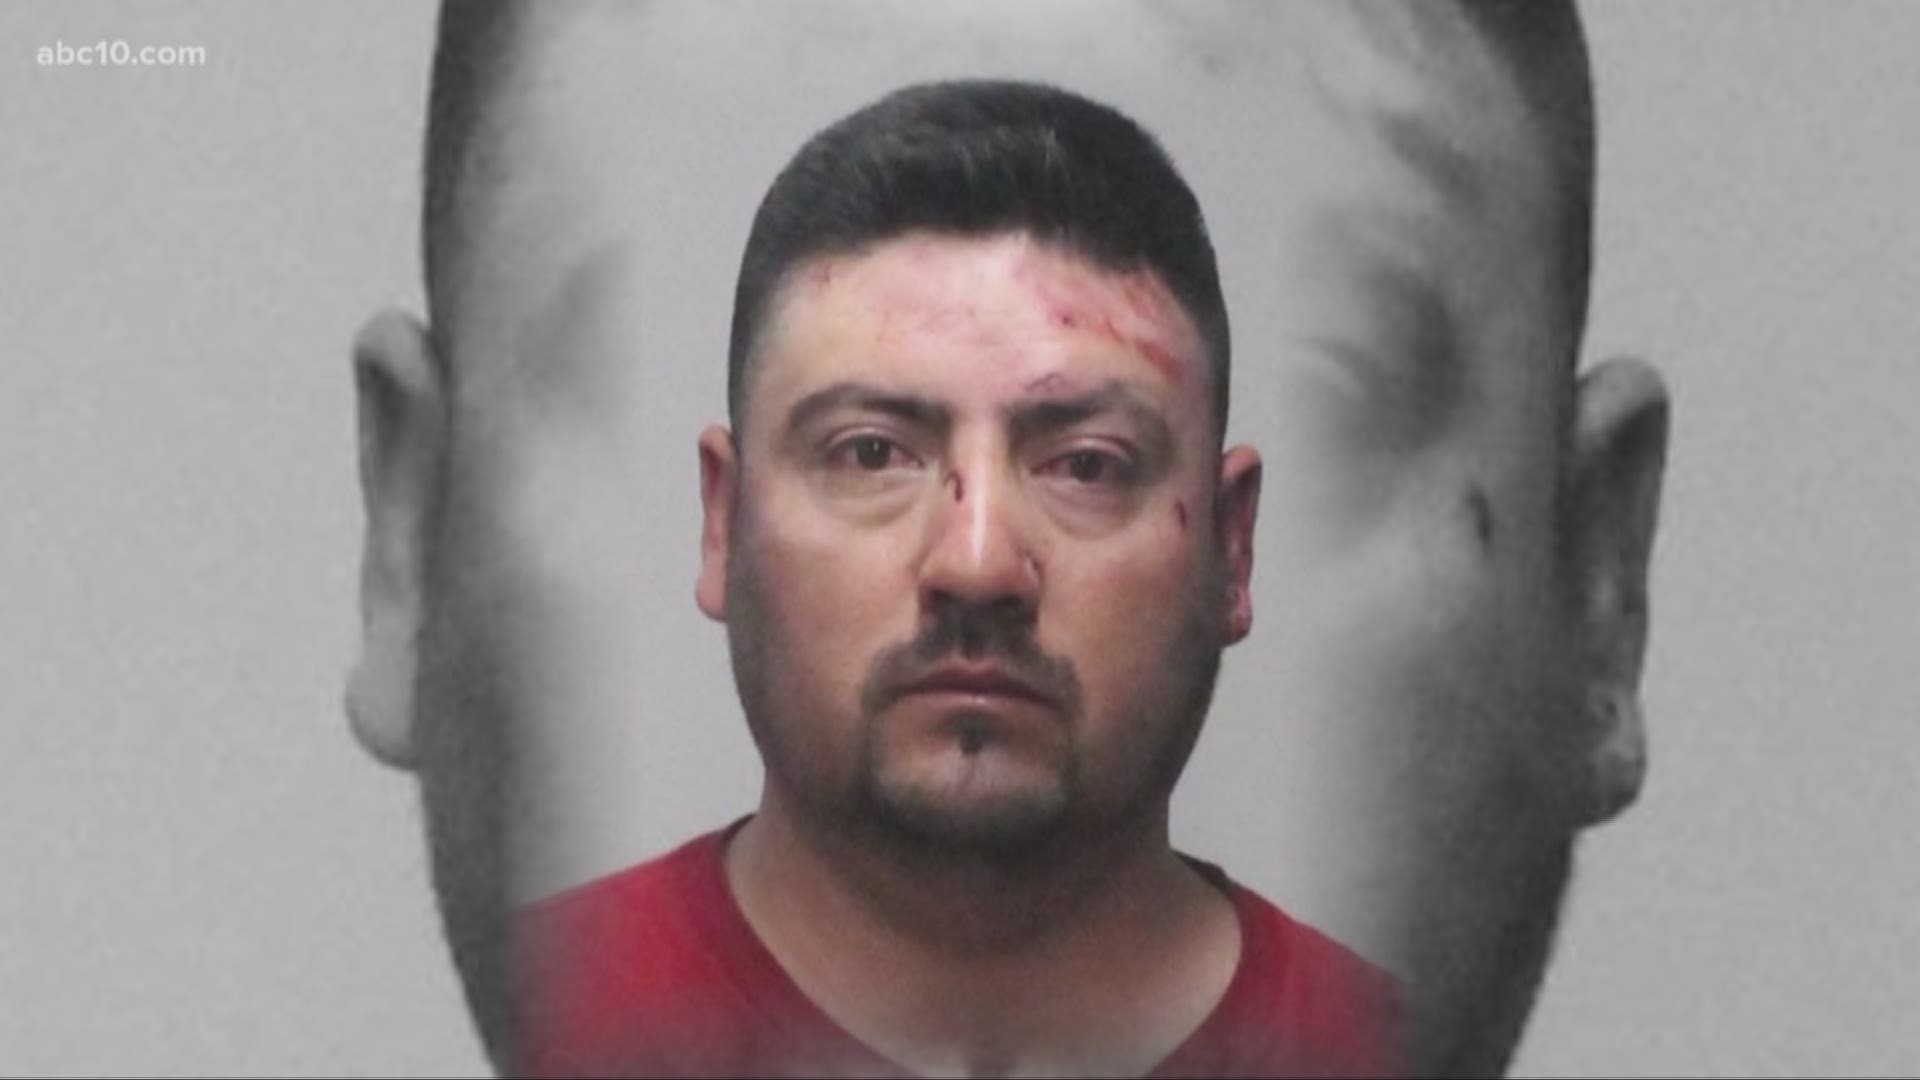 Ismael Huazo-Jardinez was arrested on charges of vehicular manslaughter and felony DUI. Authorities say a family of four was struck by the vehicle, killing 3 and injuring one 11 year-old-girl.